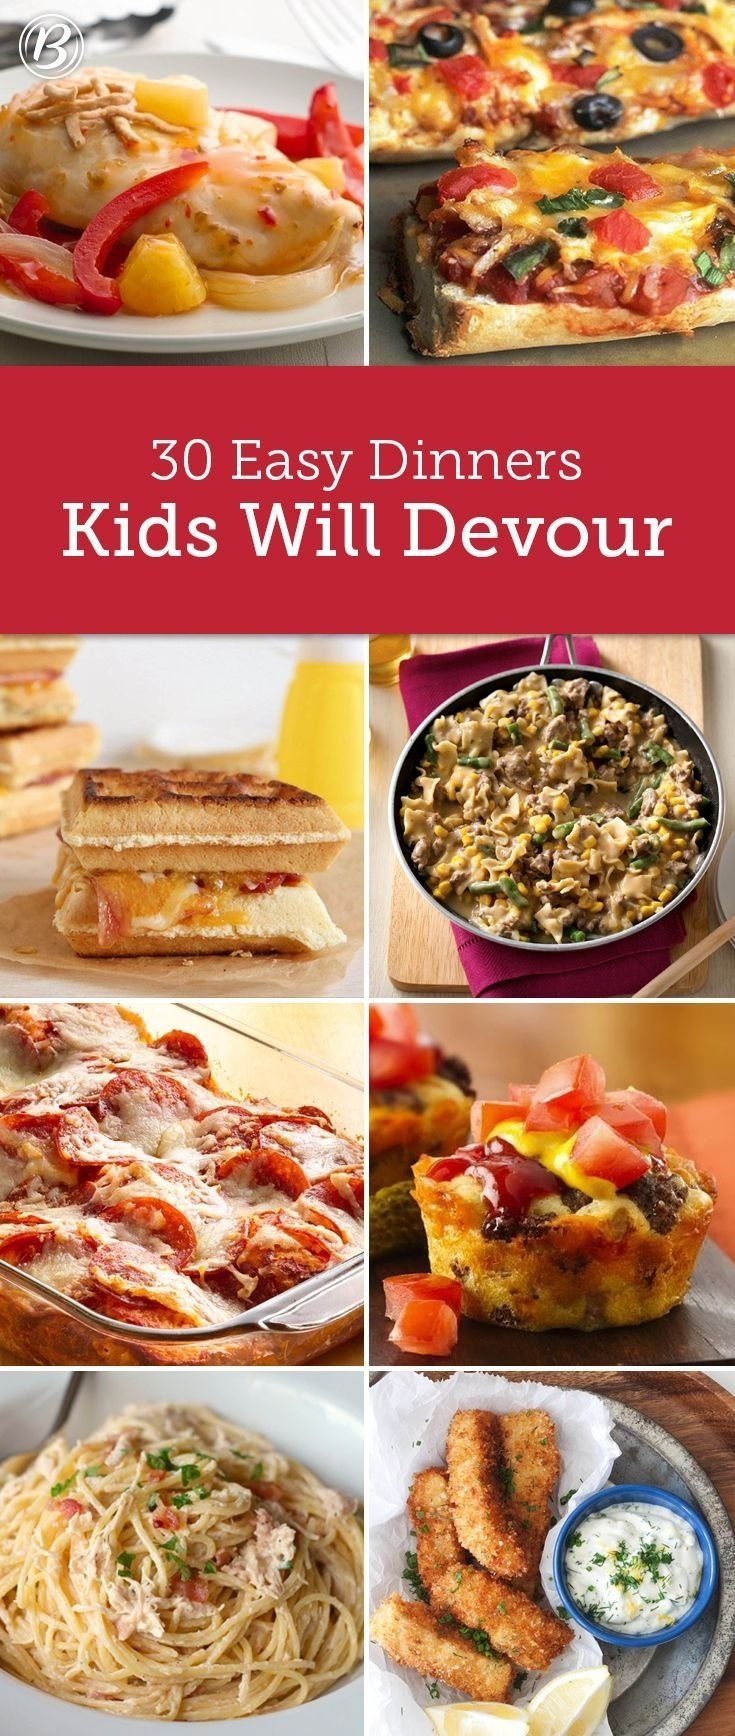 10 Lovable Healthy Kid Friendly Dinner Ideas 70 best food ideas for toddlers images on pinterest toddler food 2 2022